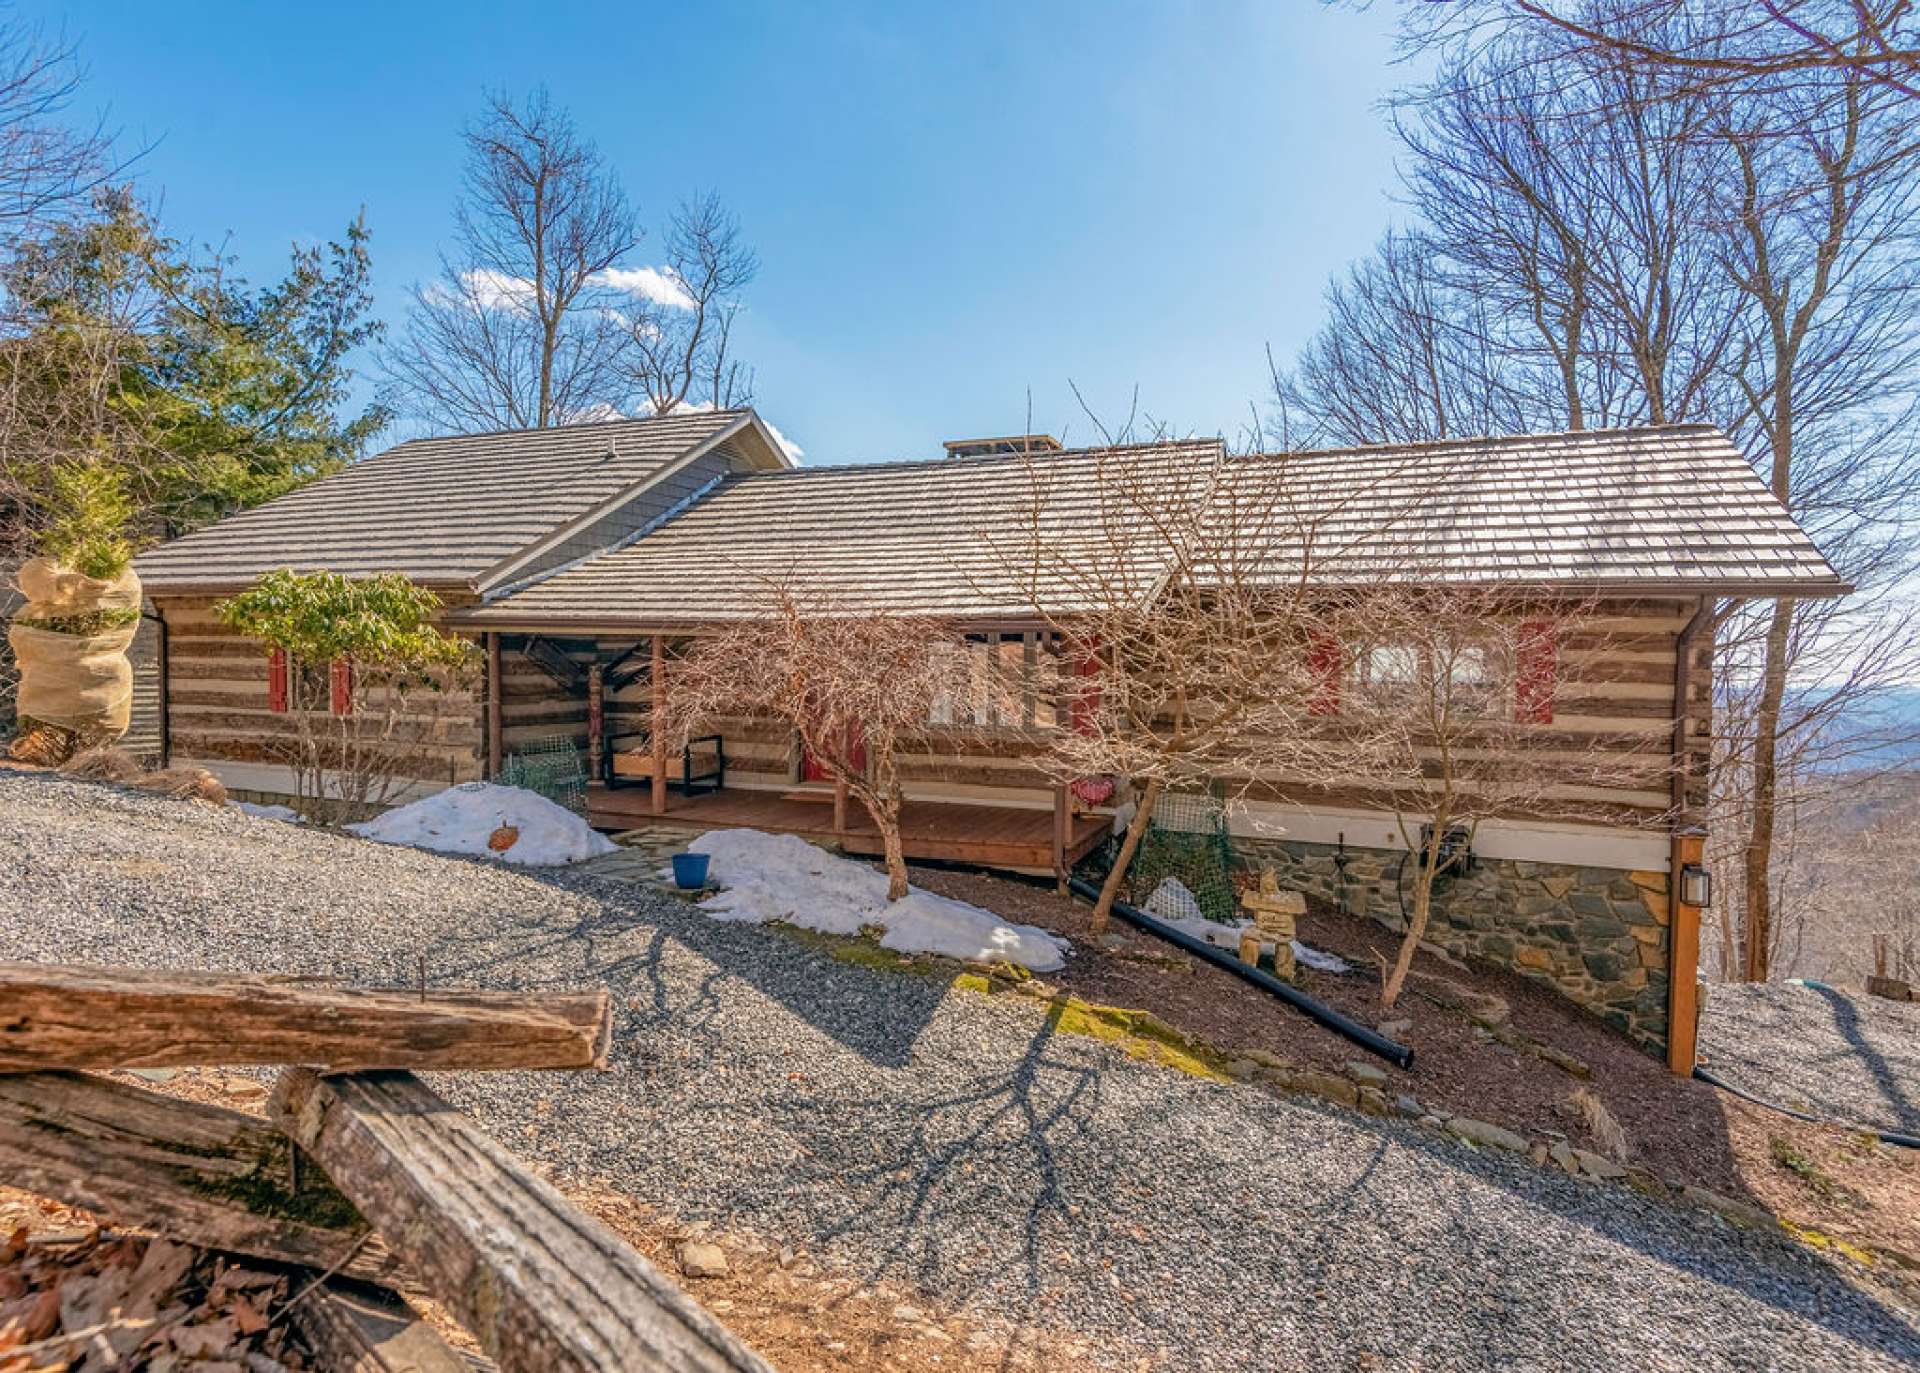 This antique style log home is in the enchanting Stonebridge community and conveniently located between Boone and West Jefferson.